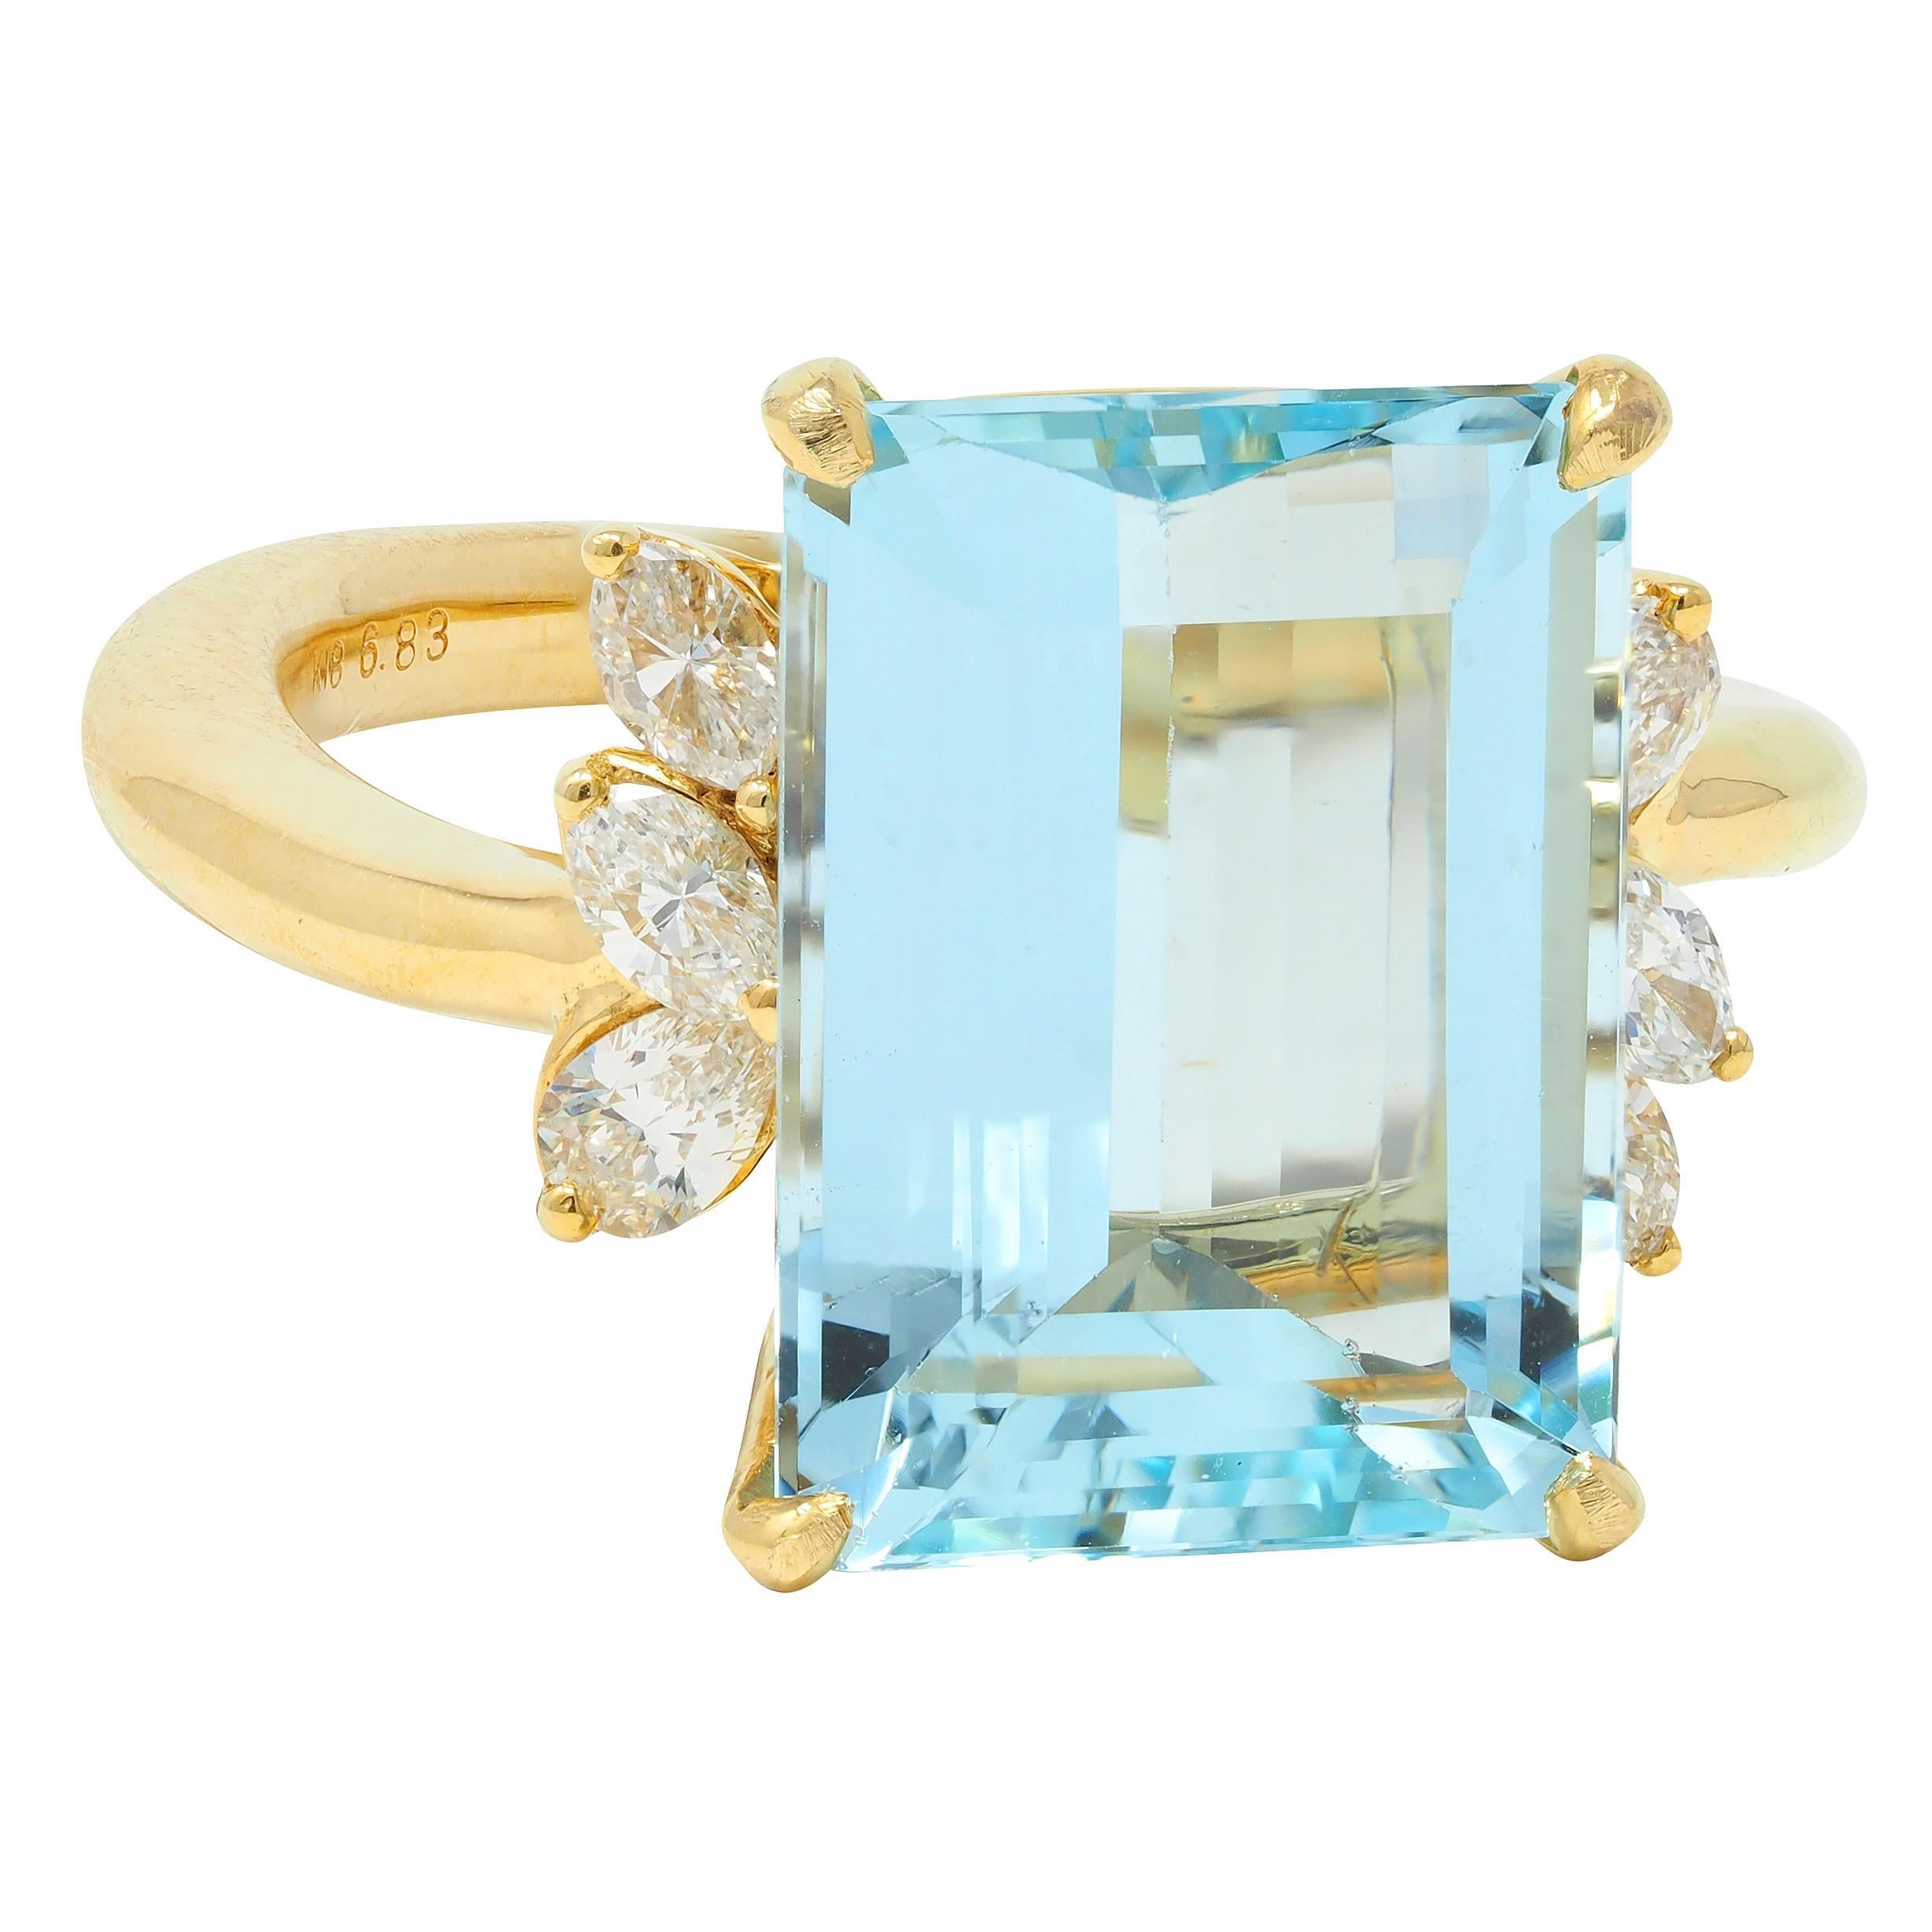 Centering an emerald cut aquamarine weighing 6.83 carats - transparent light blue in color
Prong set in basket and flanked by clusters of marquise cut diamonds 
Weighing 0.44 carat total - G color with VS clarity
Prong set in tiered